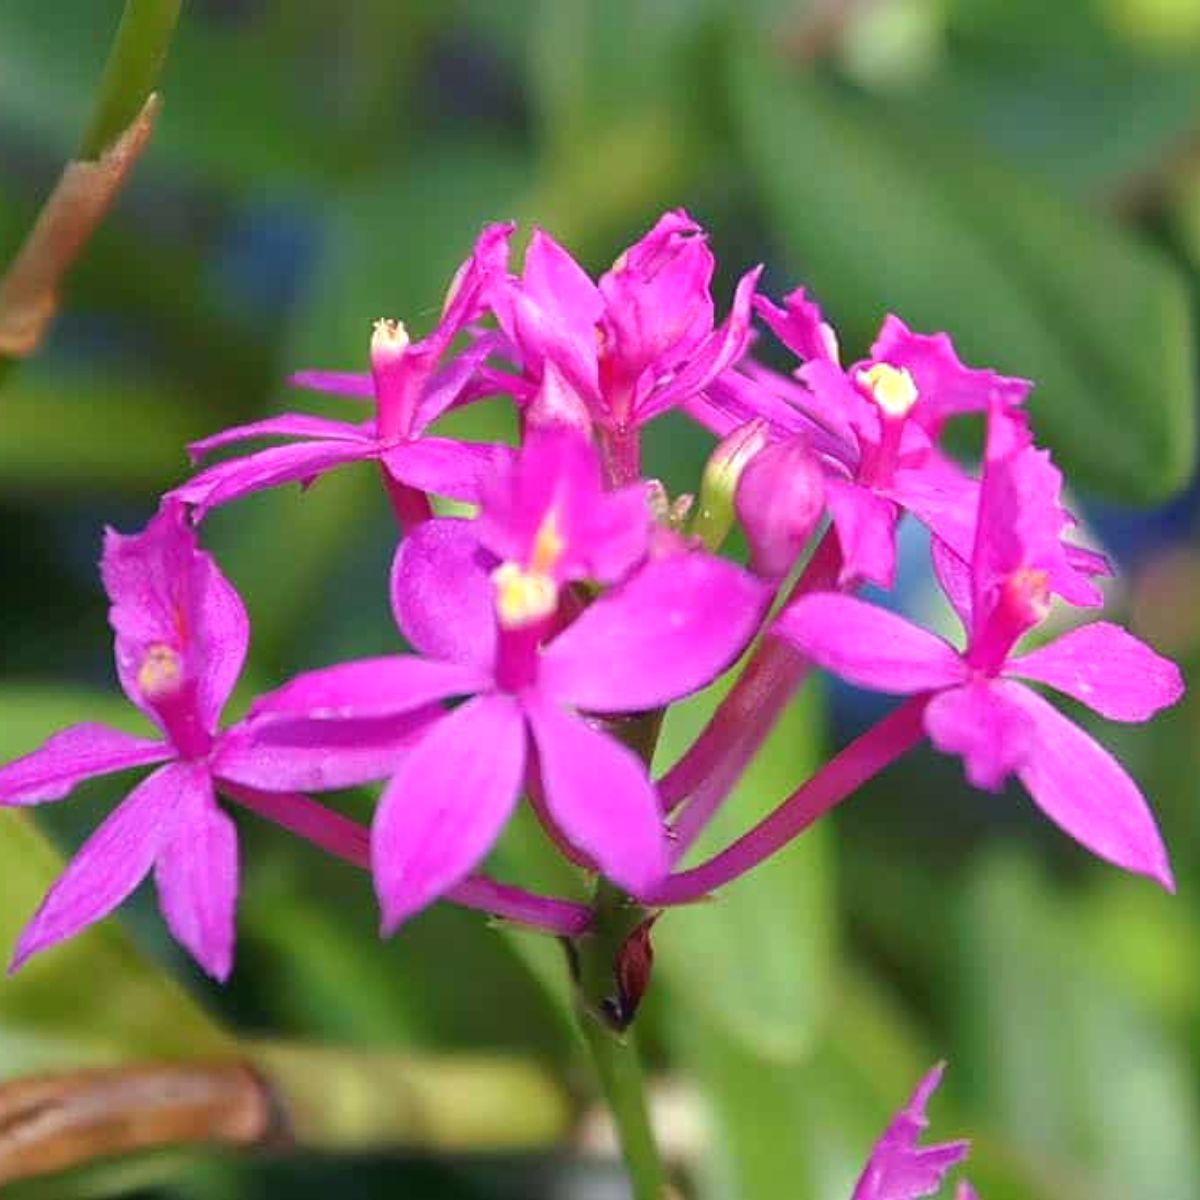 Epidendrum Pink Orchid - Delicate pink petals evoking elegance and charm